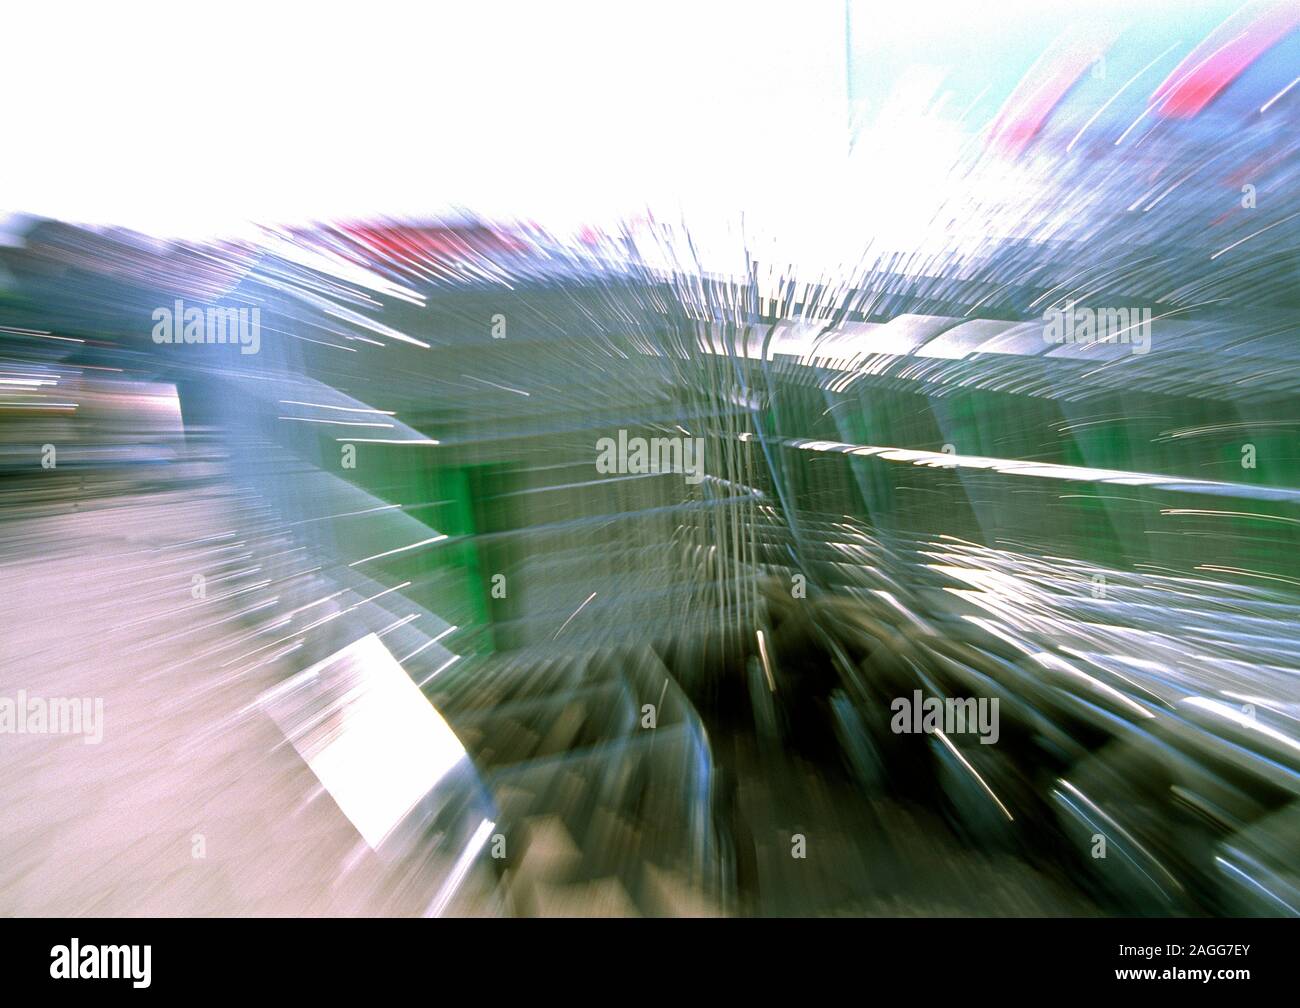 Still life. Zoom lens speed effect image of supermarket shopping trolley. Stock Photo